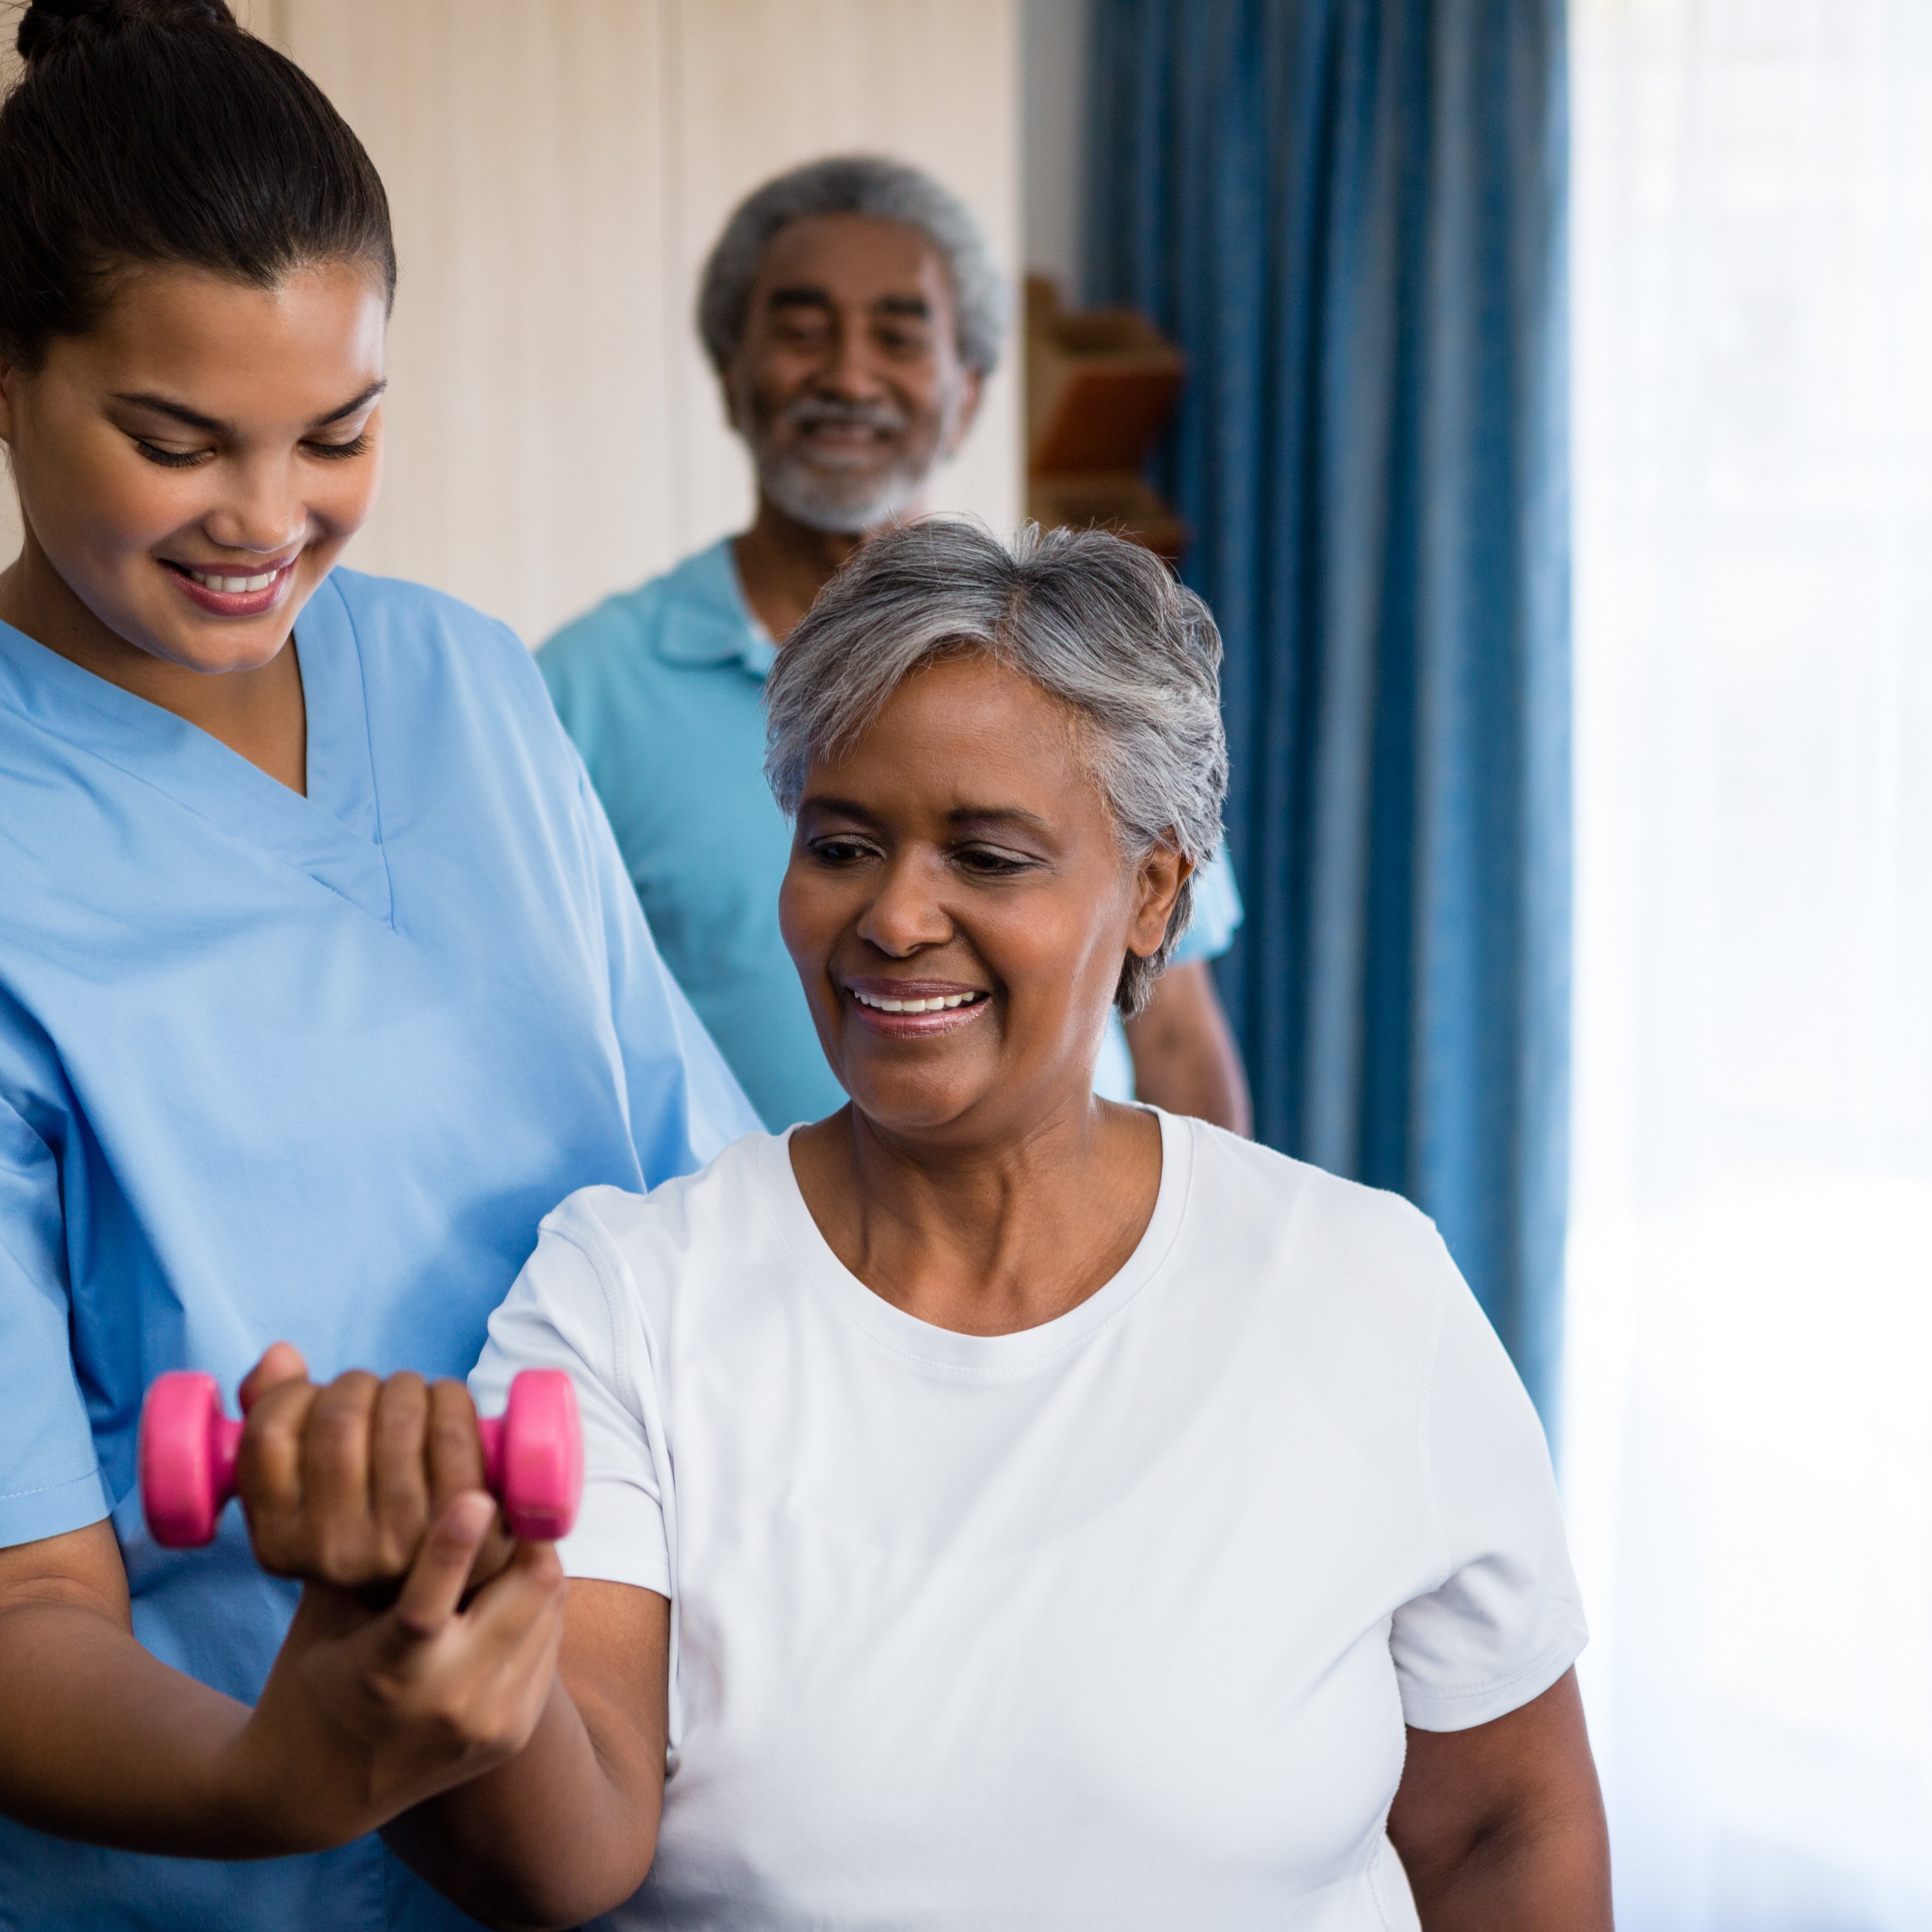 Nurse guiding senior woman in lifting dumbbell at retirement home